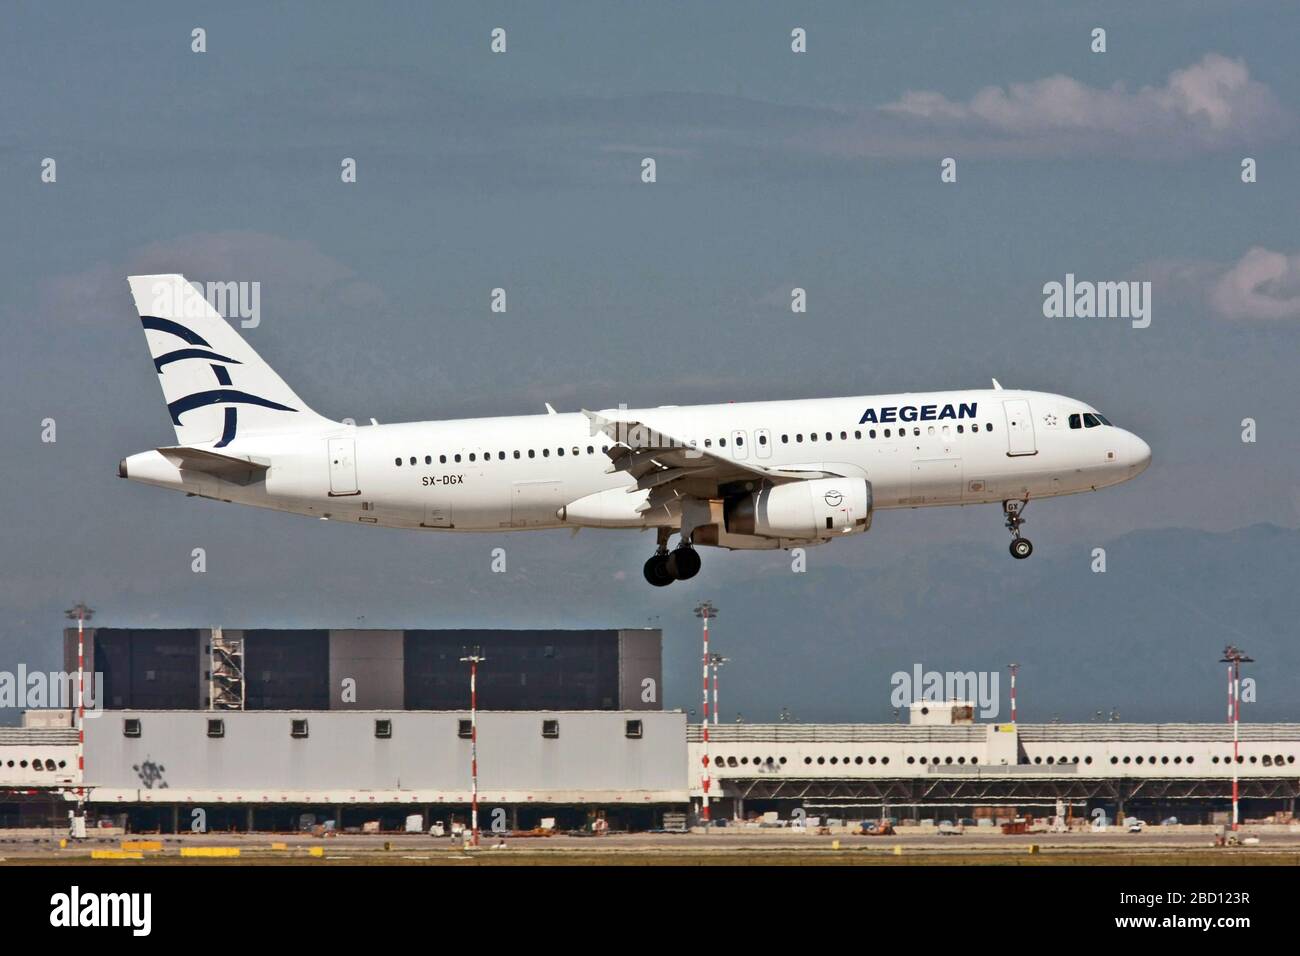 SX-DGX Aegean Airlines, Airbus A320 Photographed at Malpensa airport, Milan, Italy Stock Photo